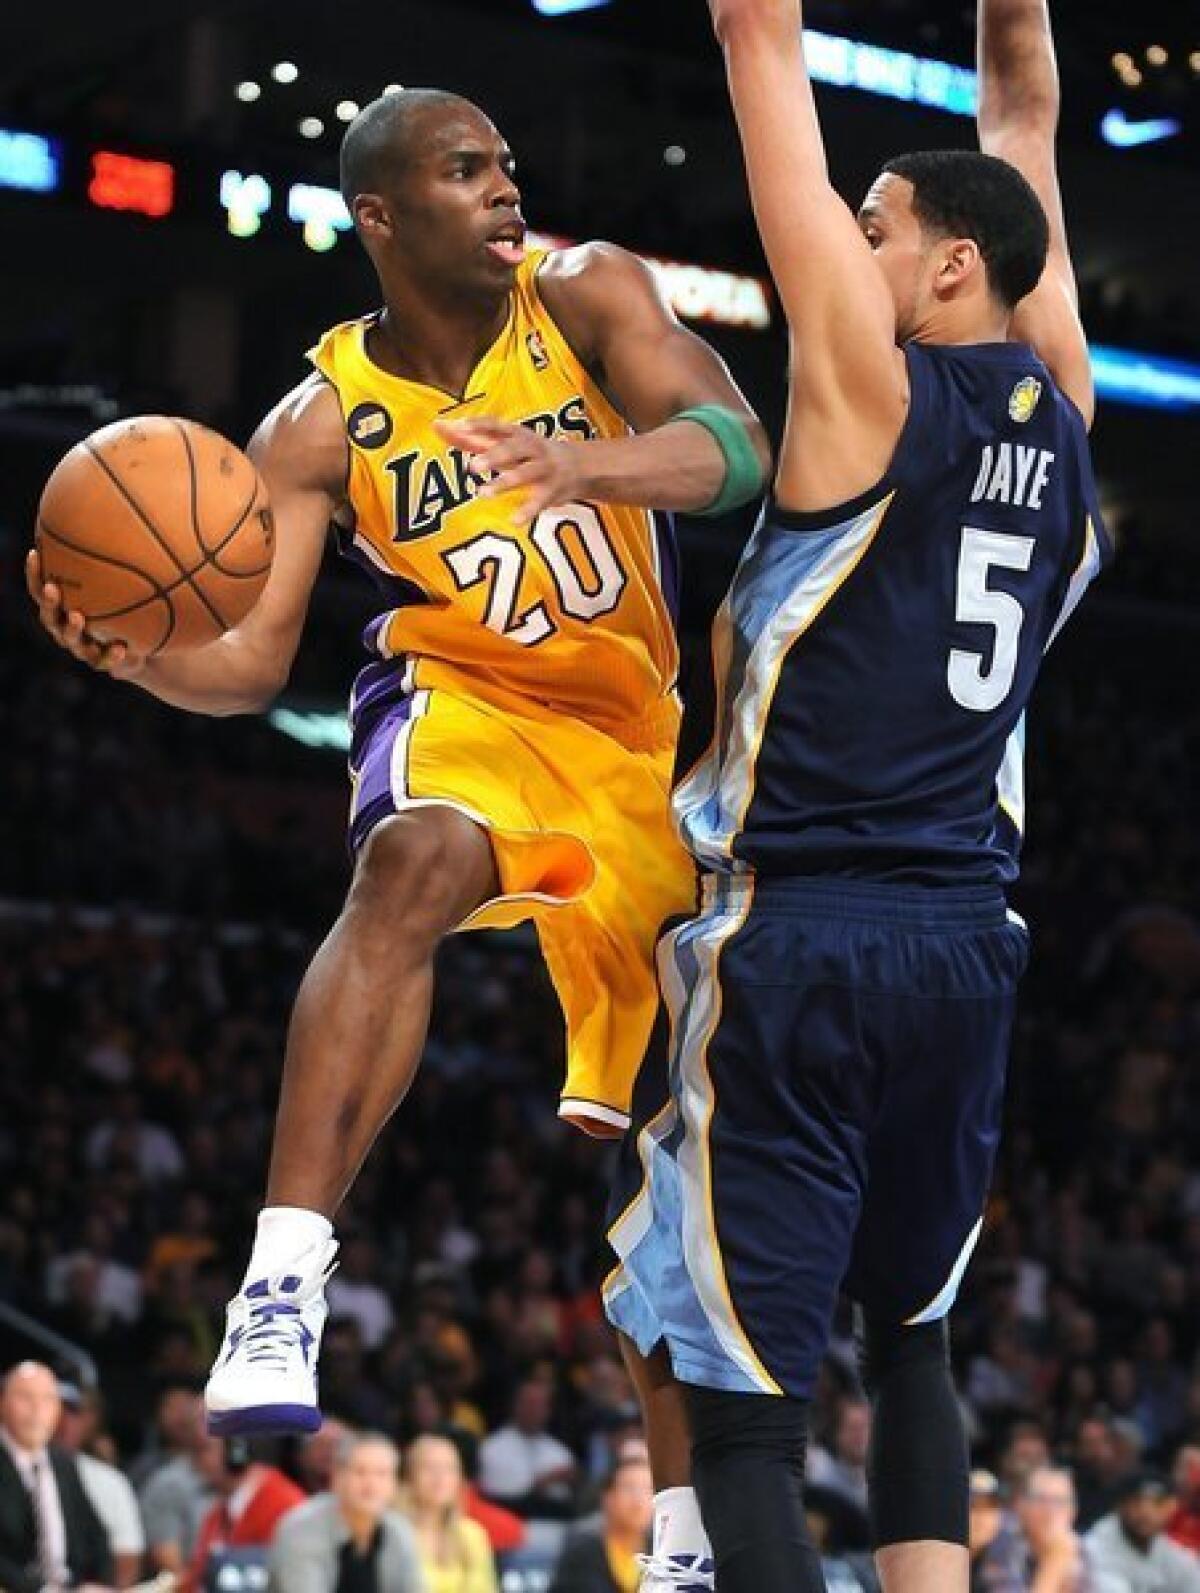 Jodie Meeks will return to the Lakers next season following the team's decision to exercise their option on the guard.